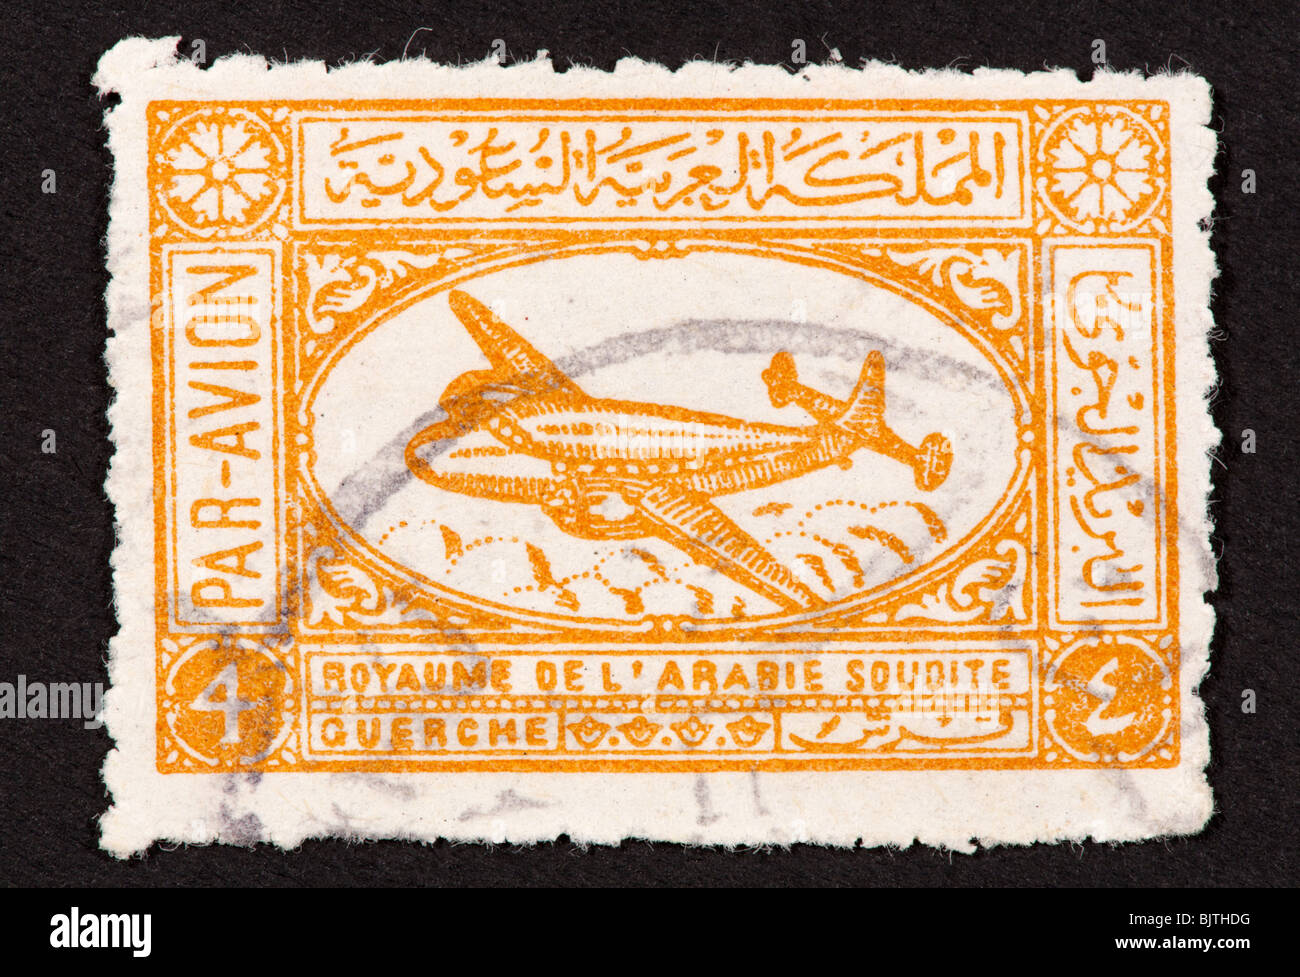 Airmail stamp from Saudi Arabia depicting an airplane. Stock Photo